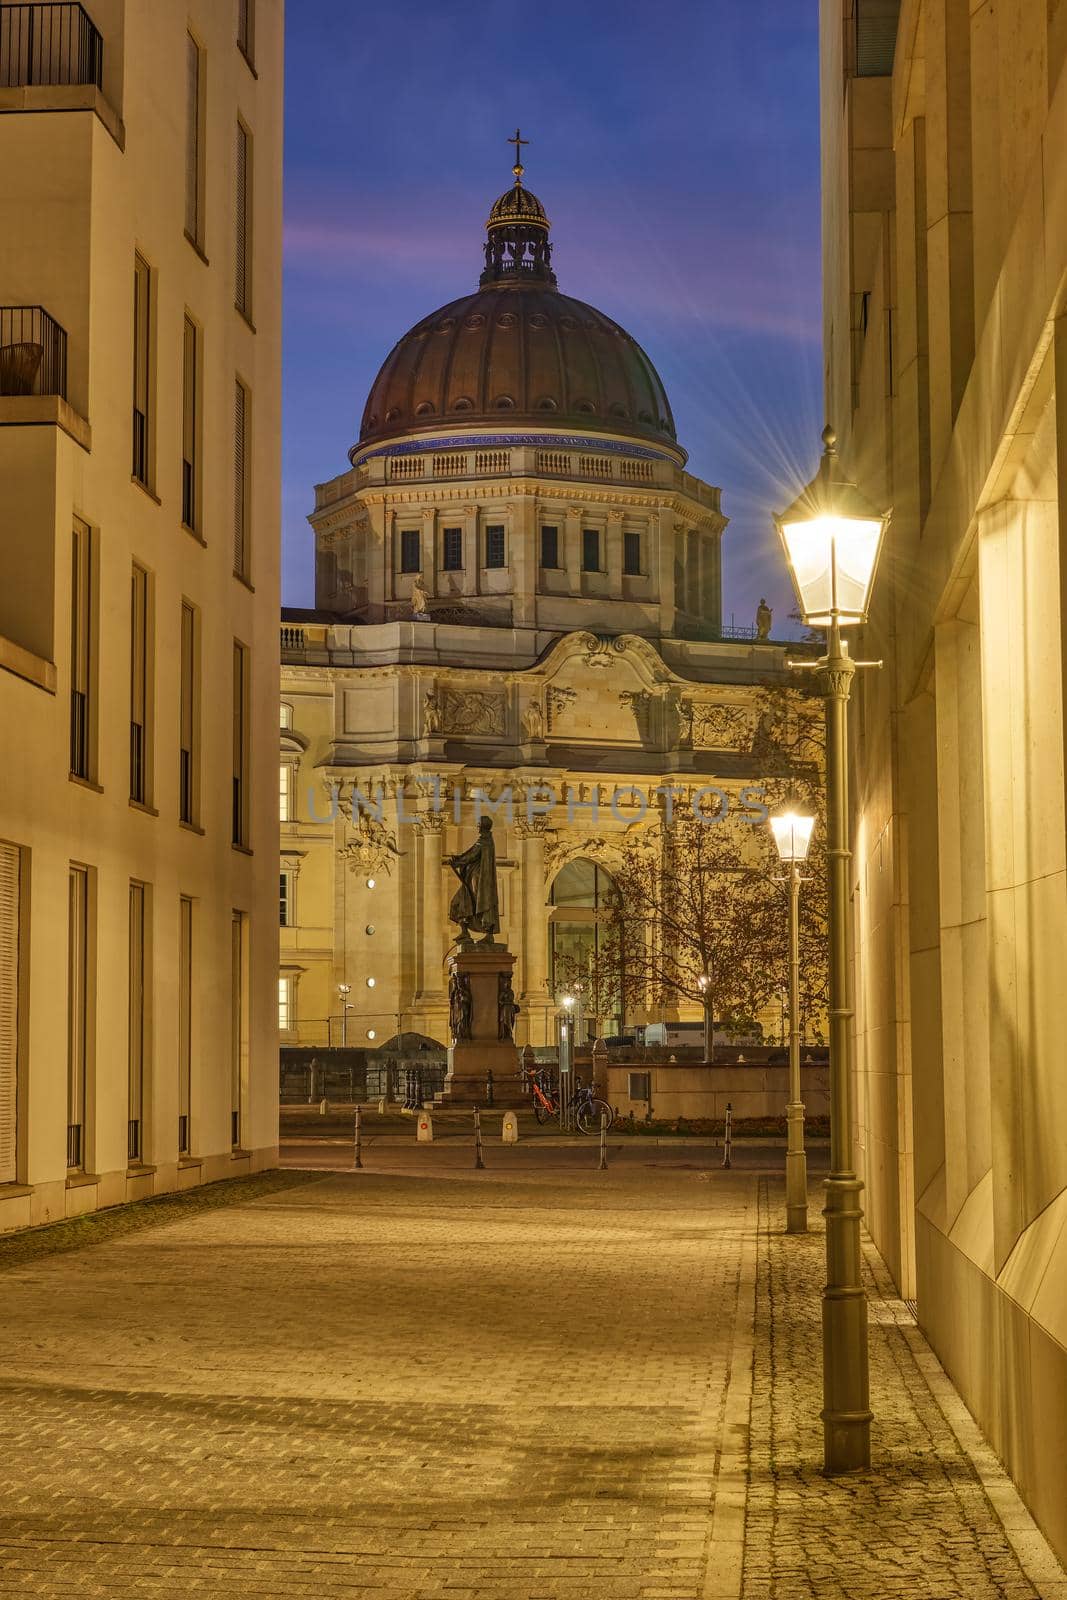 View to the reconstructed Berlin Palace at night